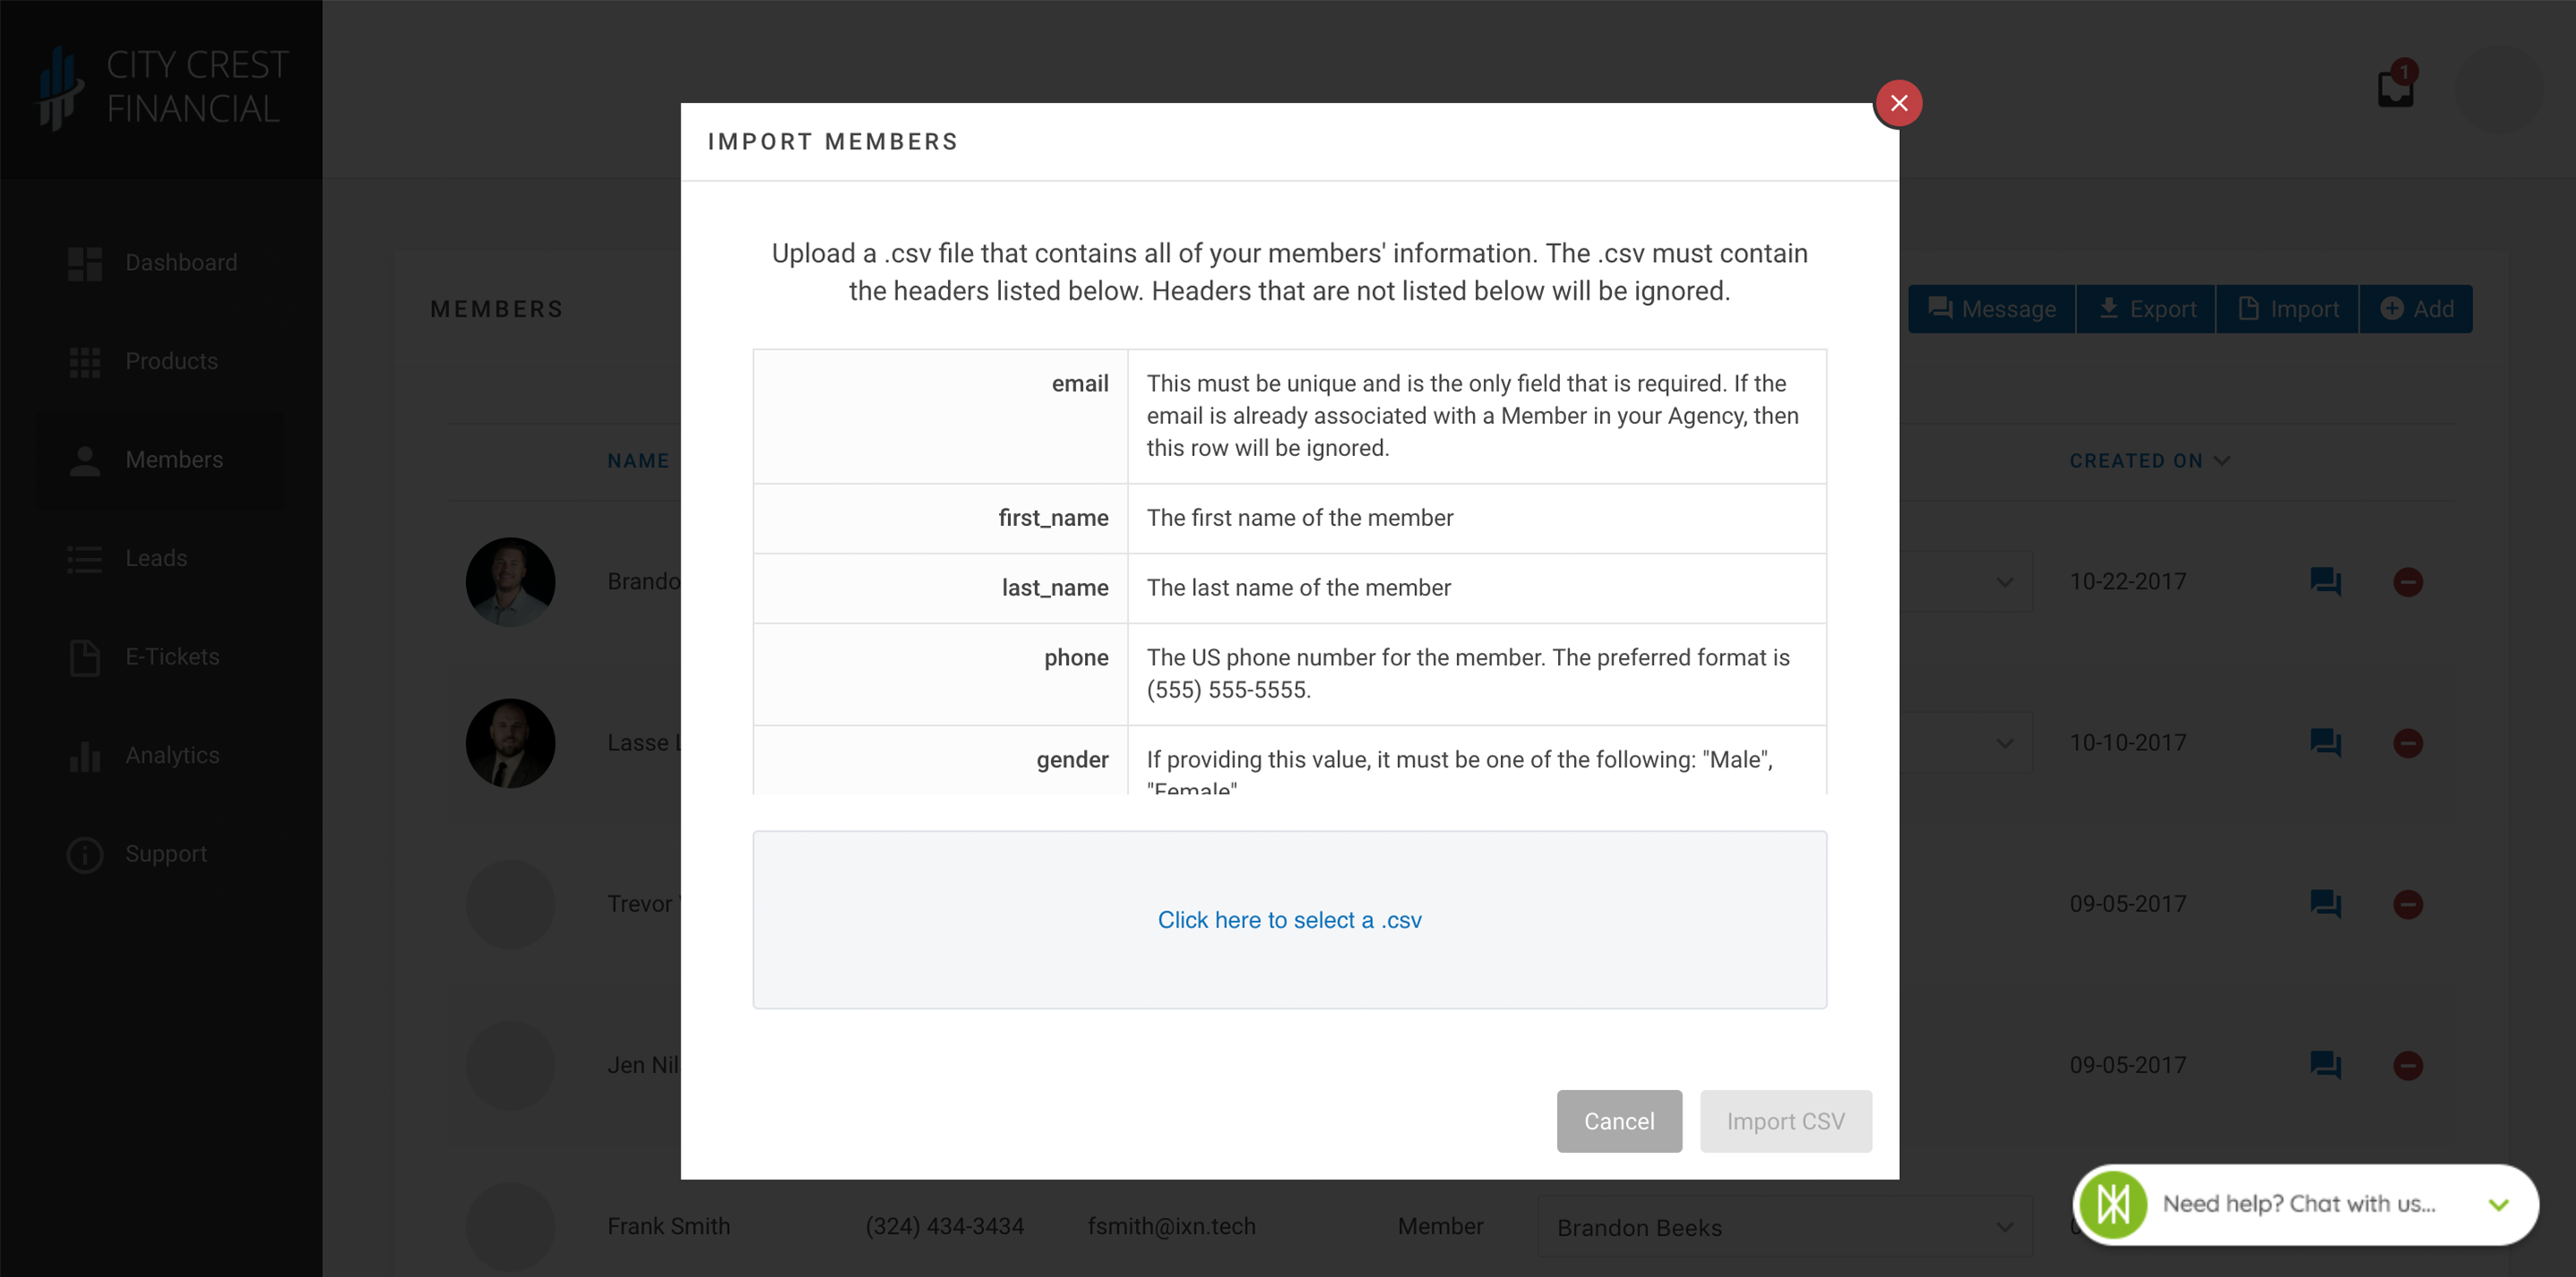 Dashboard - Member Import Instructions